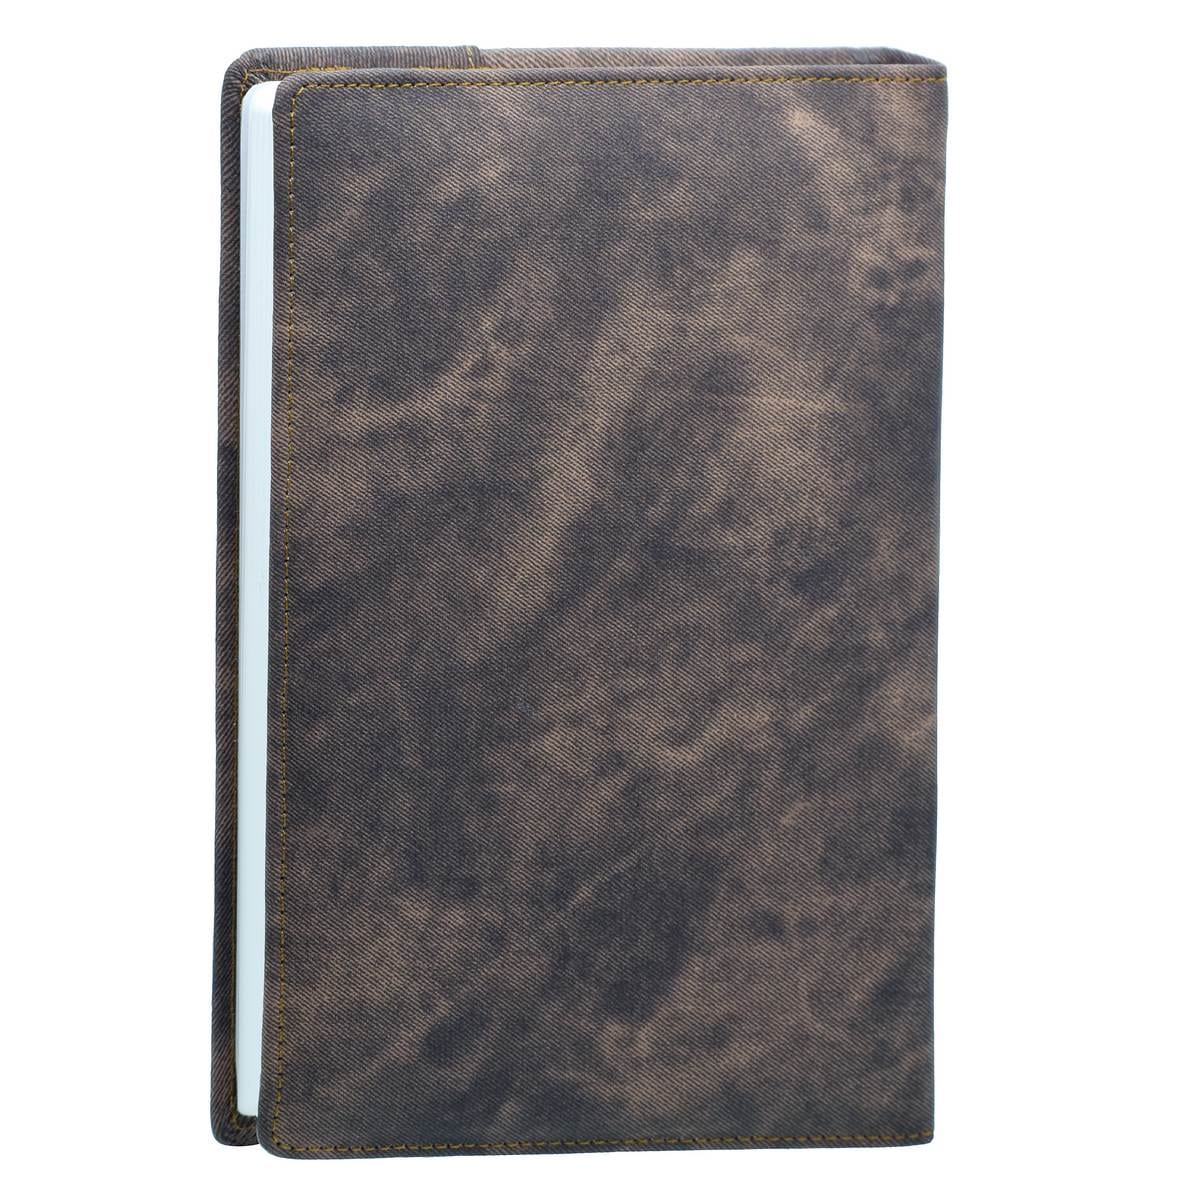 jags-mumbai Notebooks & Diaries Note book Diary A5 Jeans Cloth DarkBrown